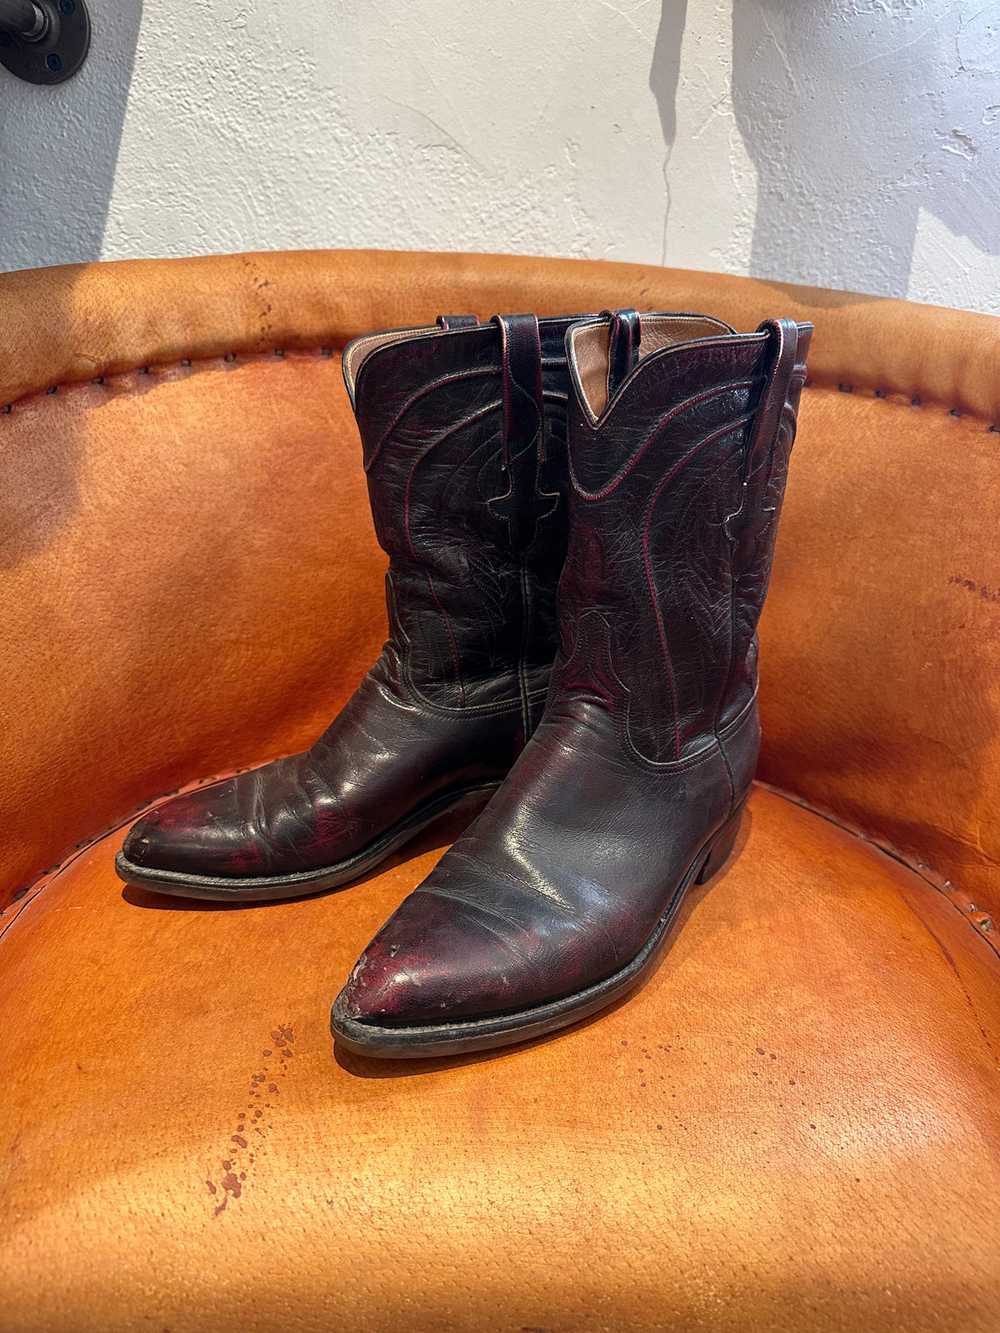 Lucchese Cordovan Boots w/Tooled Leather Uppers - Gem